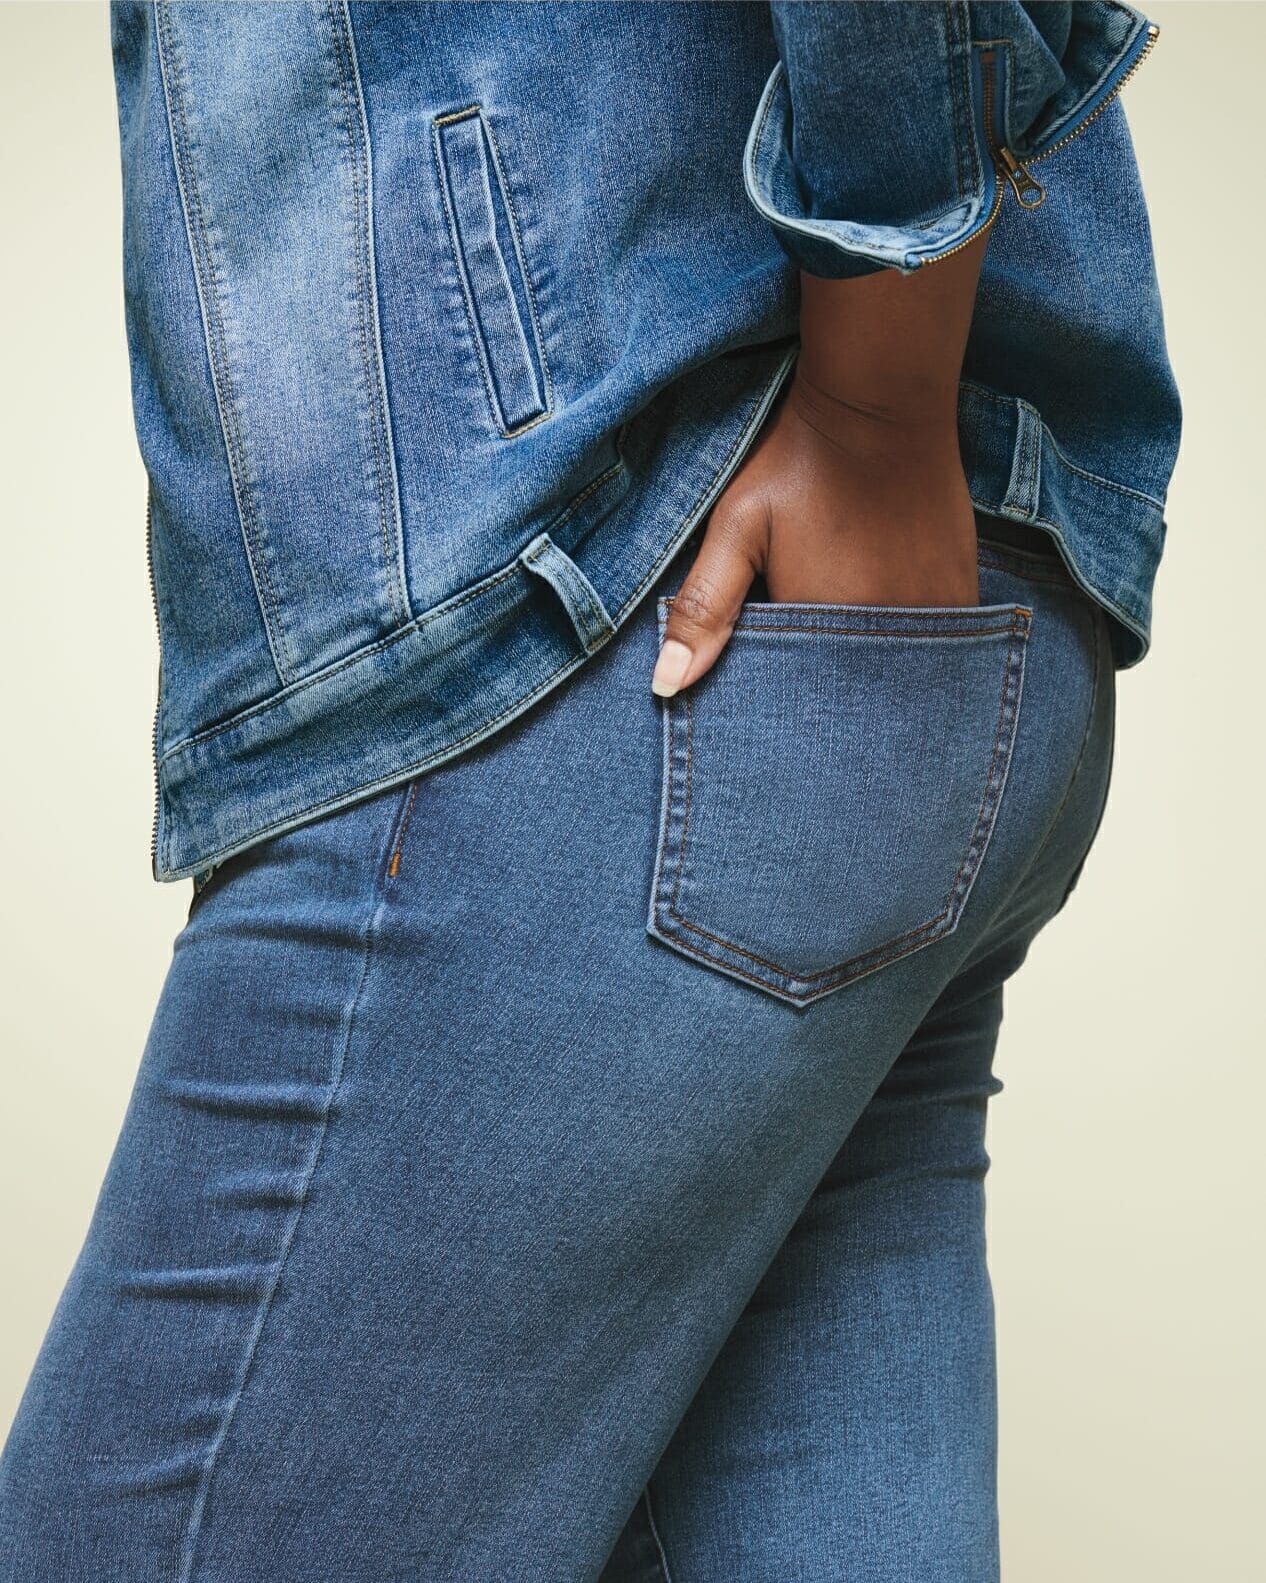 plus size woman wearing denim with hand in pocket